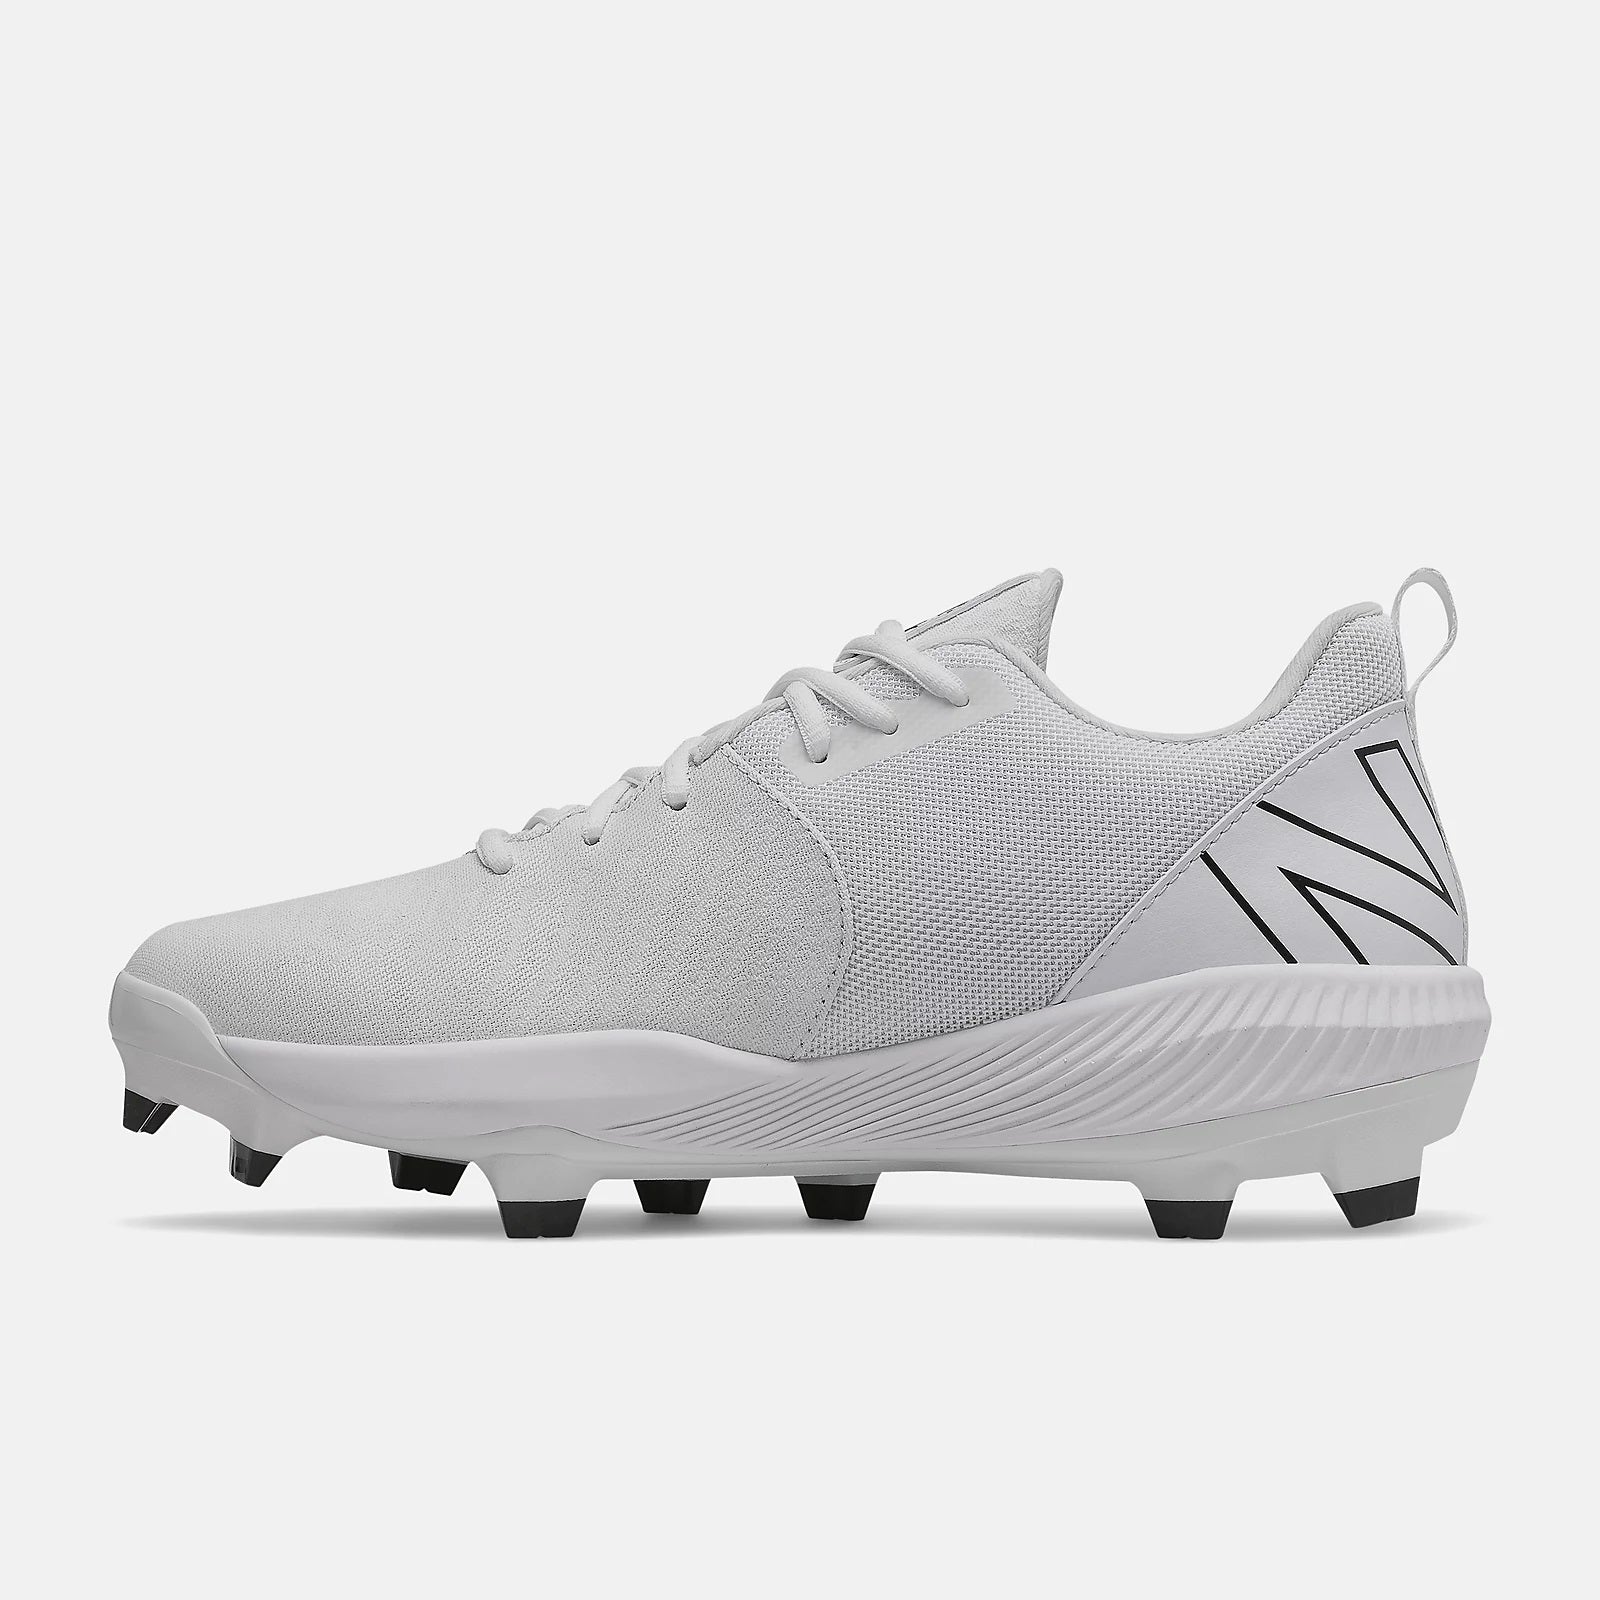 New Balance - White FuelCell 4040v6 Molded Cleats (PL4040W6)